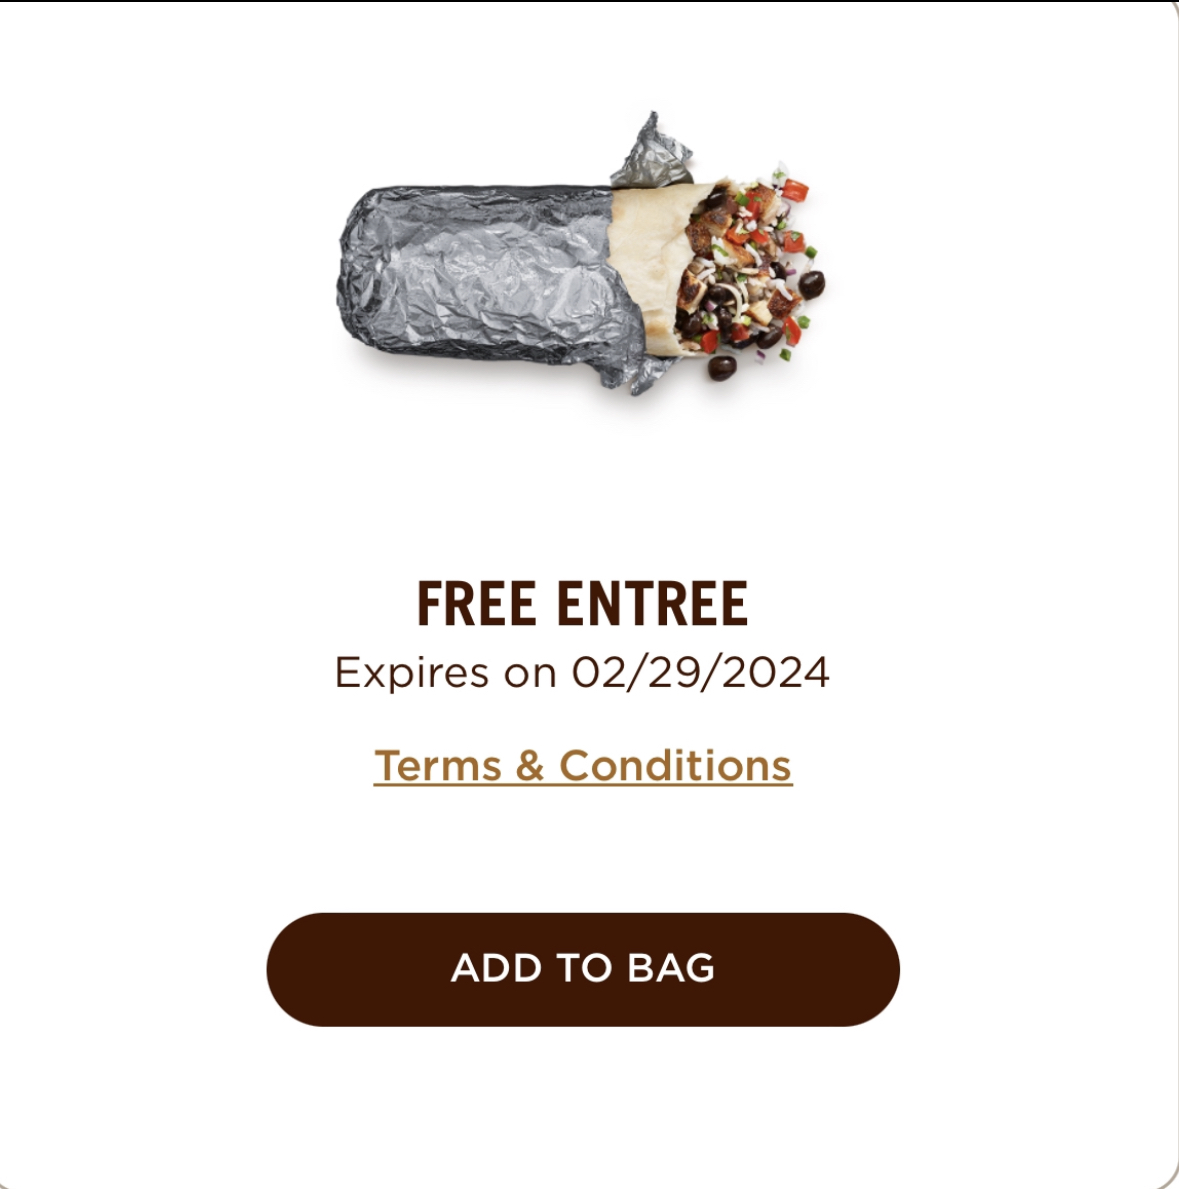 FREE Chipotle ANYONE? 🌯 Members just cooked thankfully we have a code to spare who wants it? Like & Retweet, we will pick one random person to send the code VIA DM's good luck!